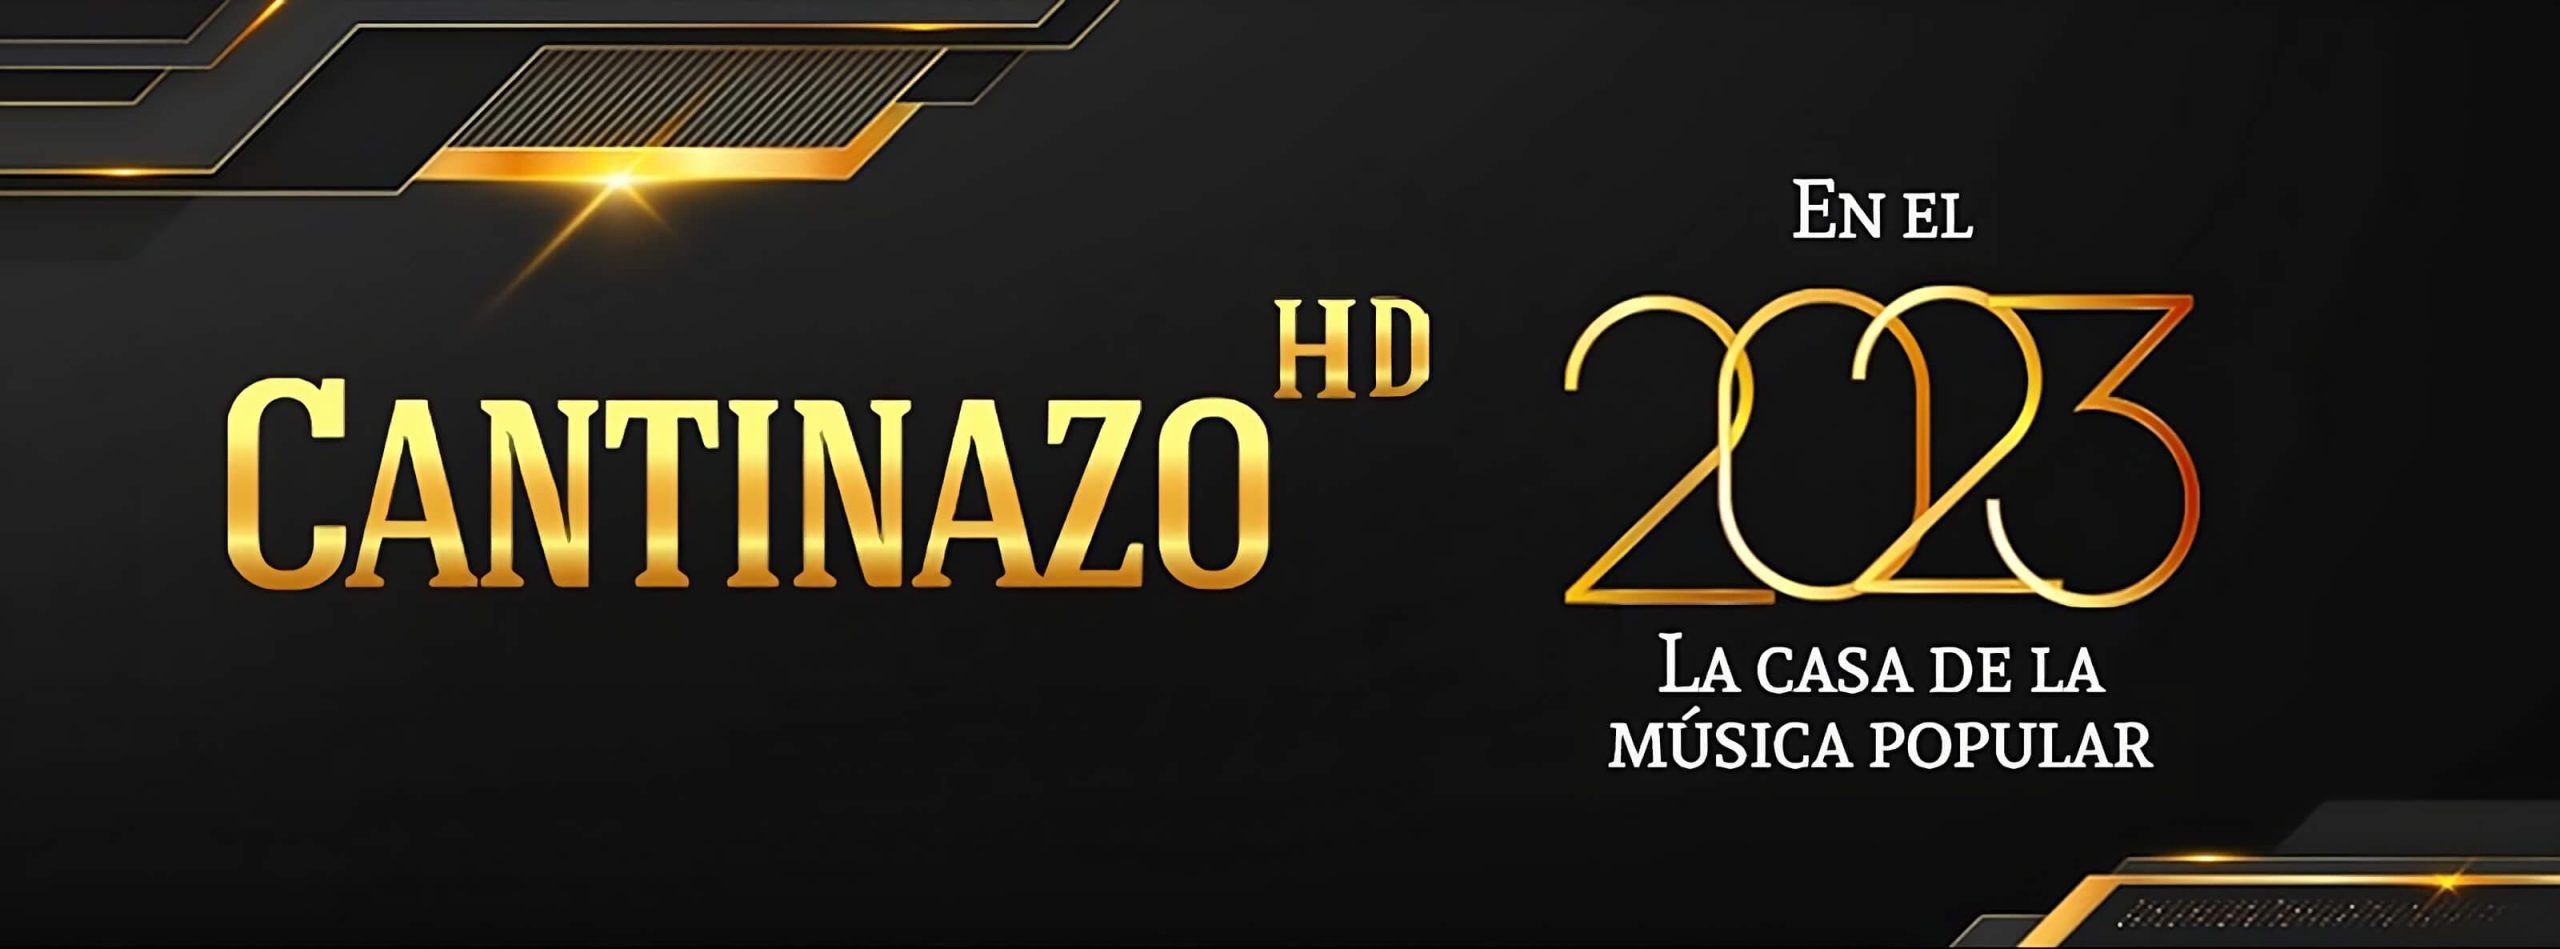 Cantinazo-HD-2023-scaled